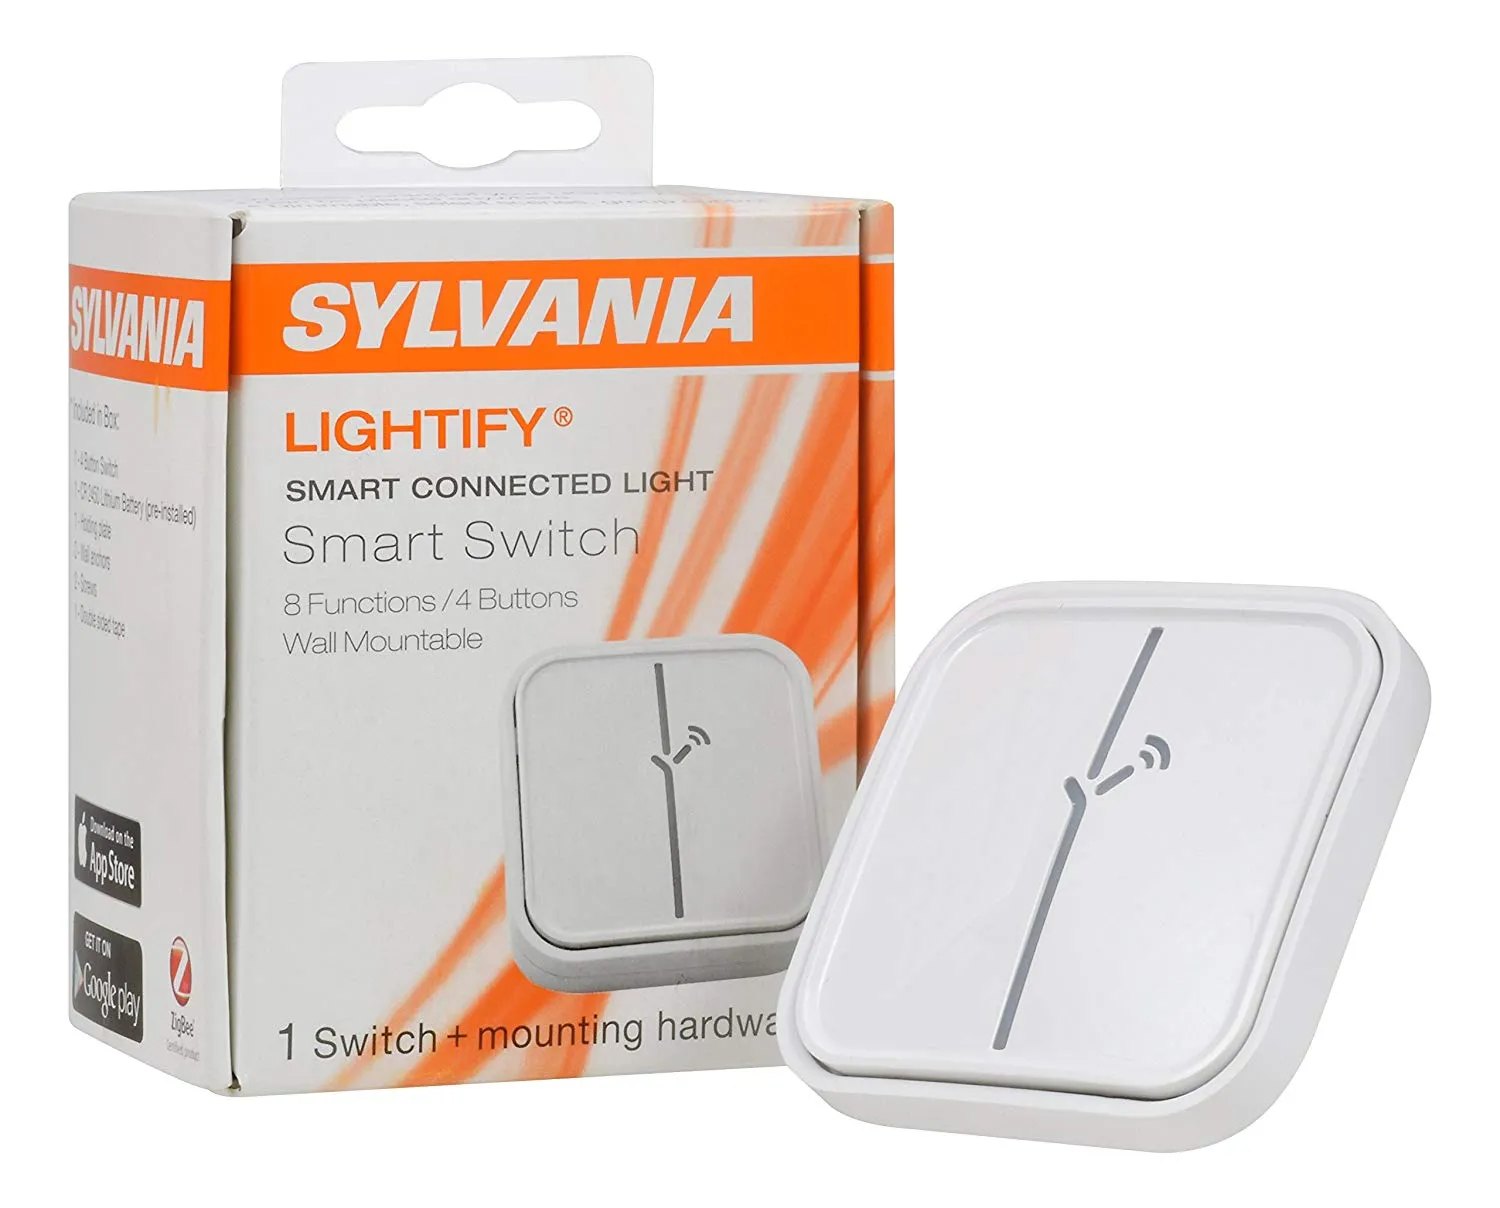 Lightify Smart Switch 8 Functions / 4 Buttons